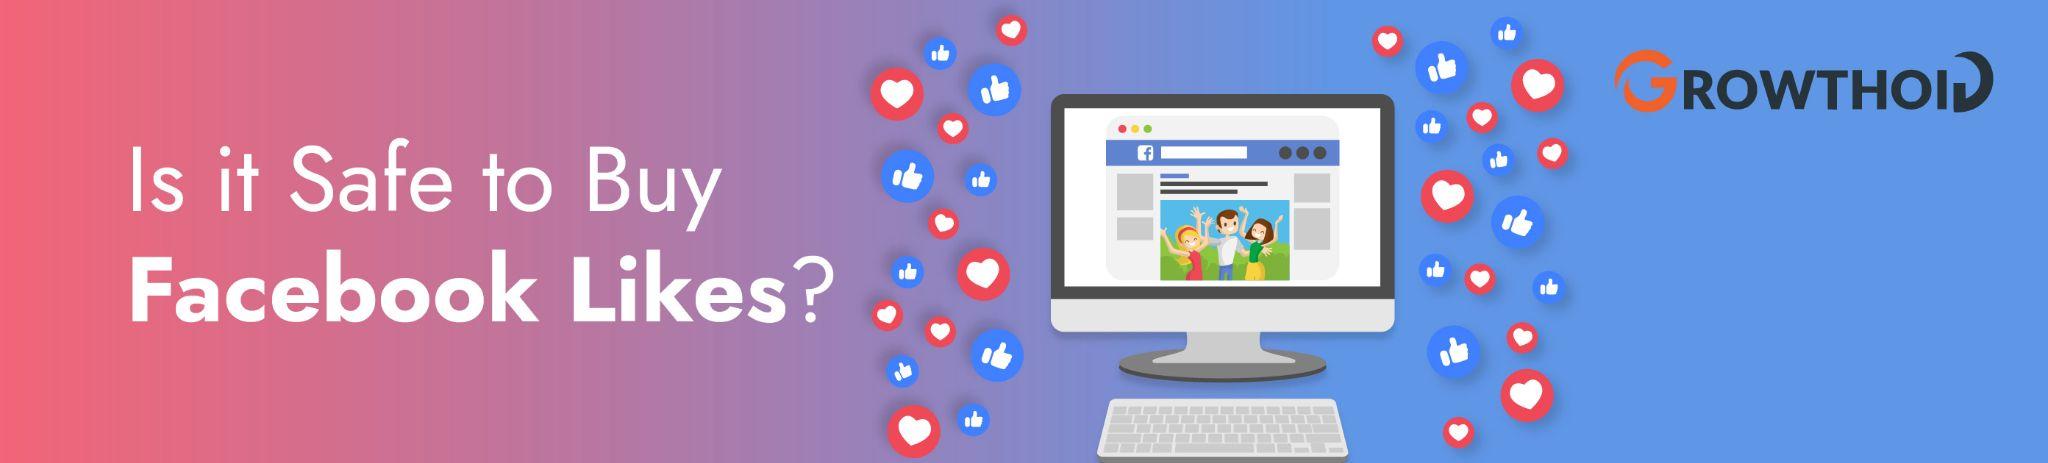 Is it Safe to Buy Facebook Likes?